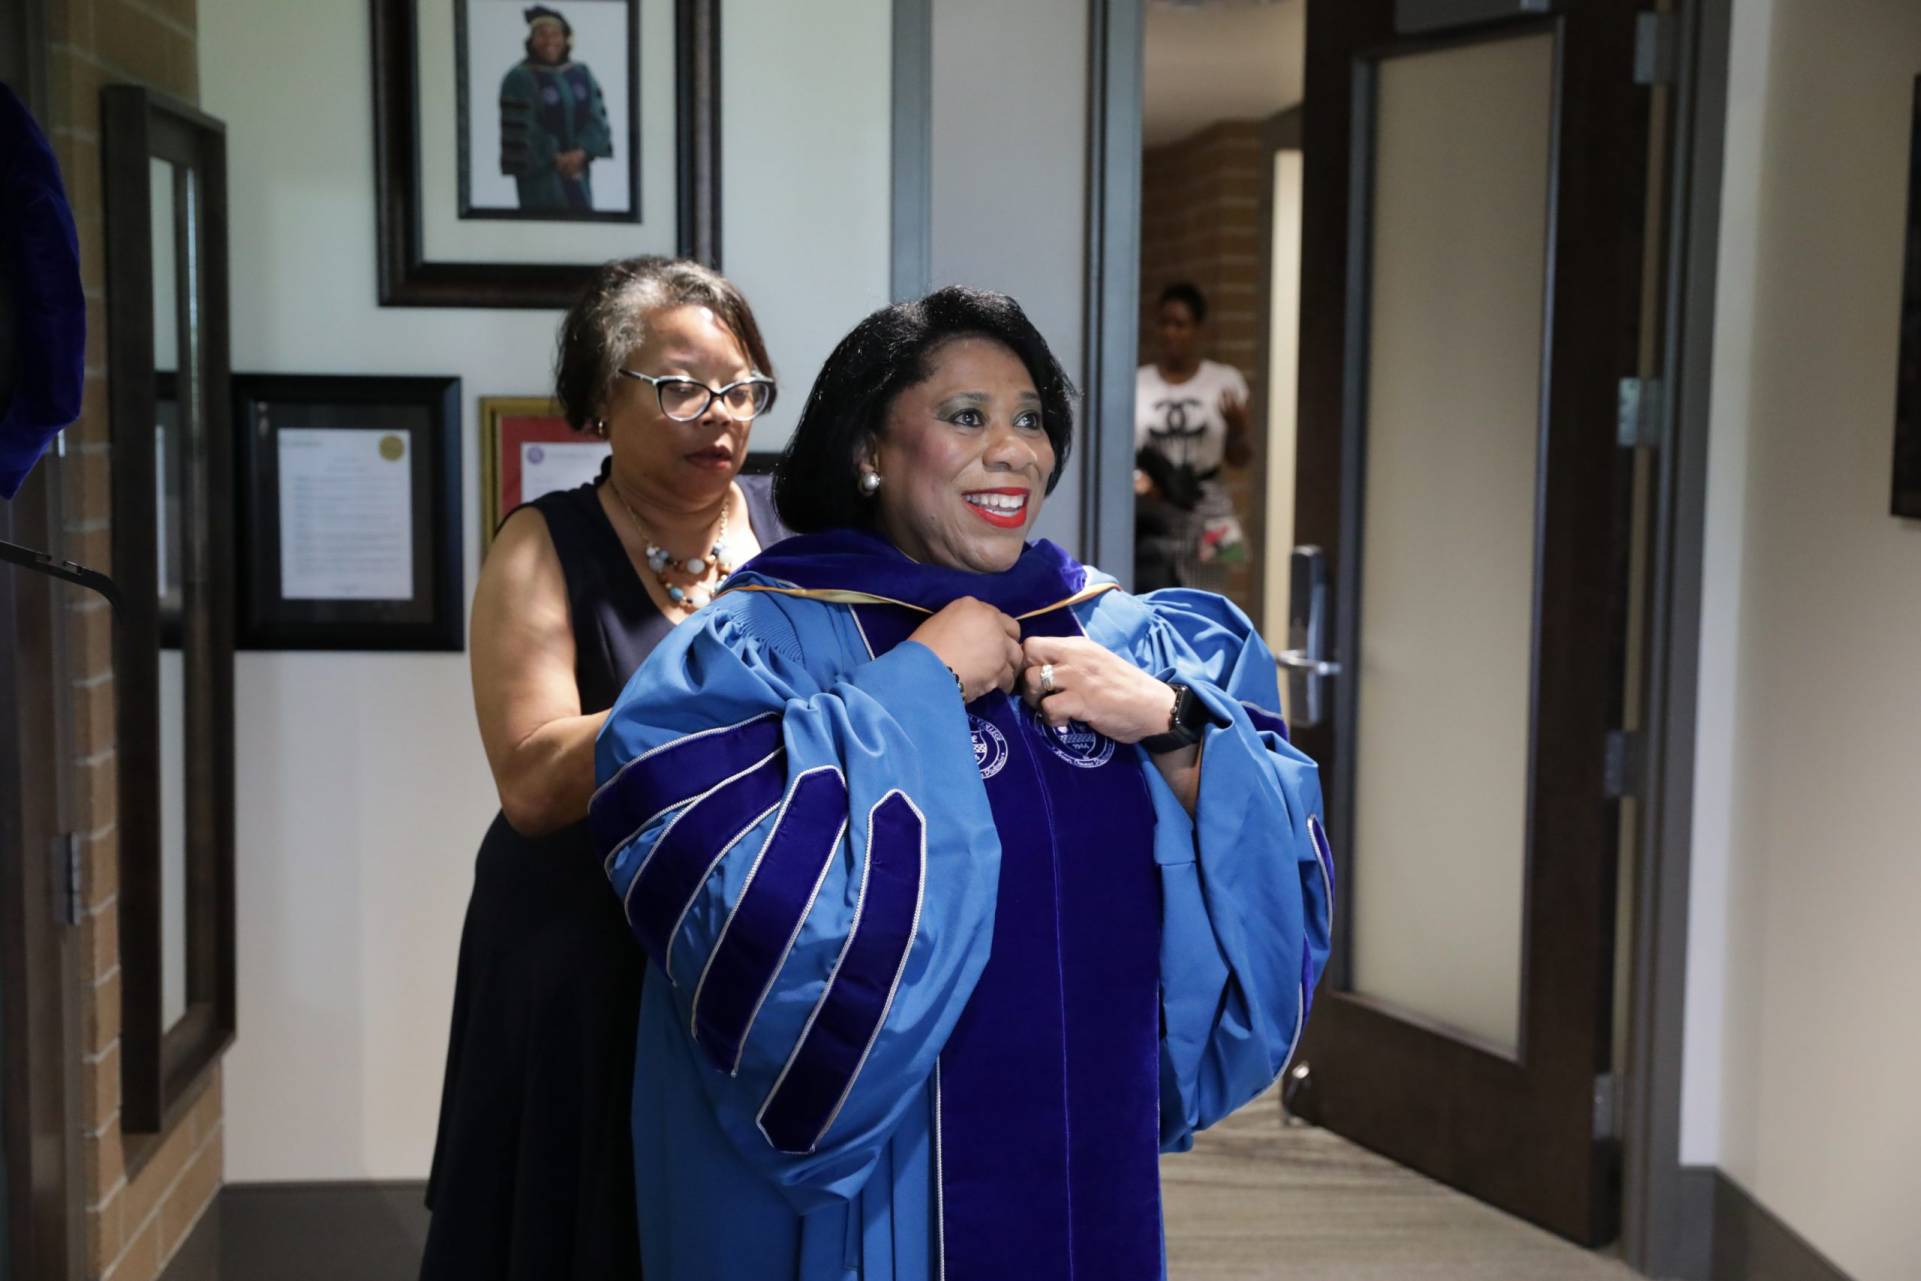 Dr. Harvey-Smith donning her gown for the Installation ceremony.